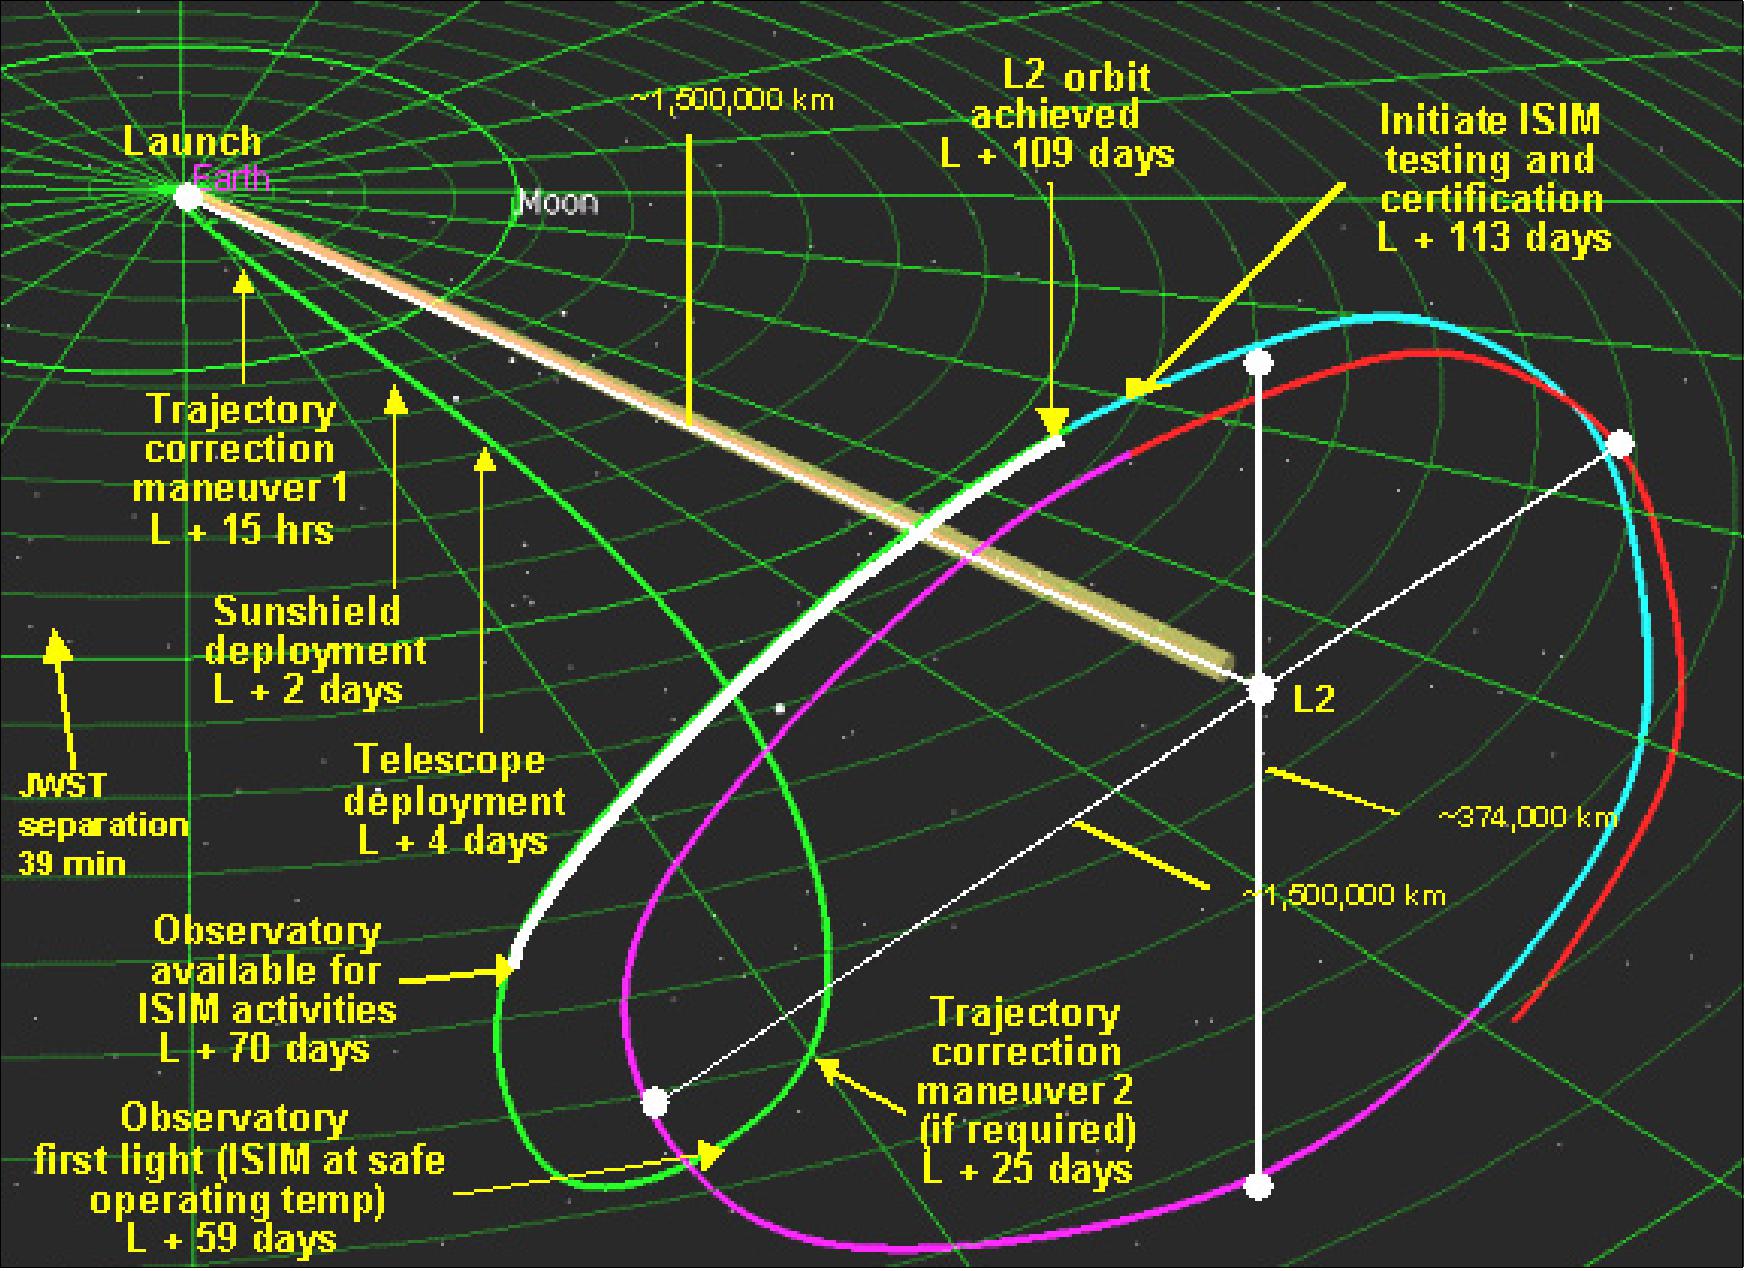 Figure 6: Overview of JWST trajectory to L2 (image credit: NASA)